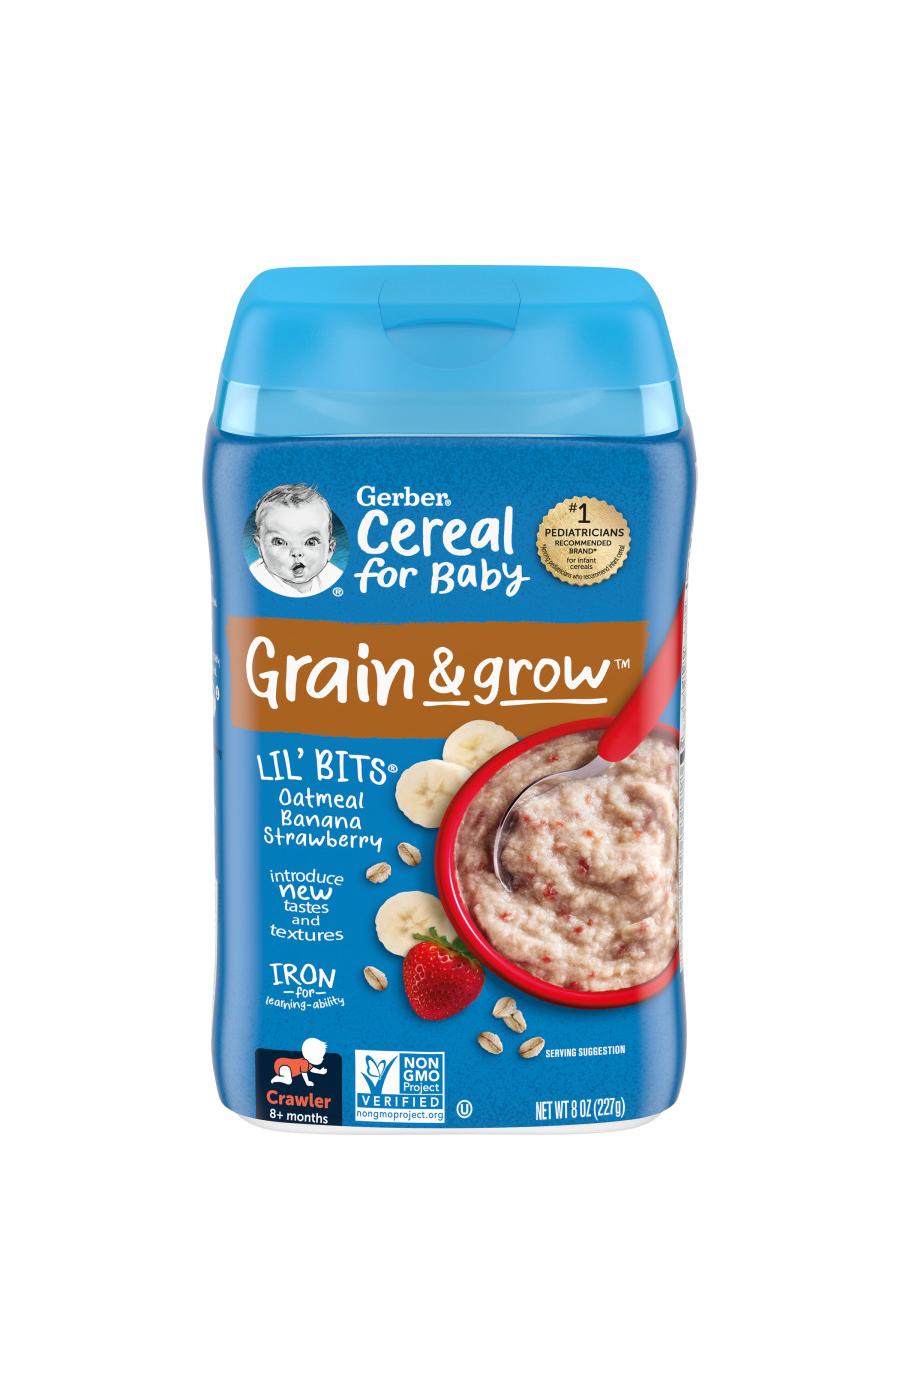 Gerber Cereal for Baby Grain & Grow Lil' Bits - Oatmeal Banana & Strawberry; image 1 of 8